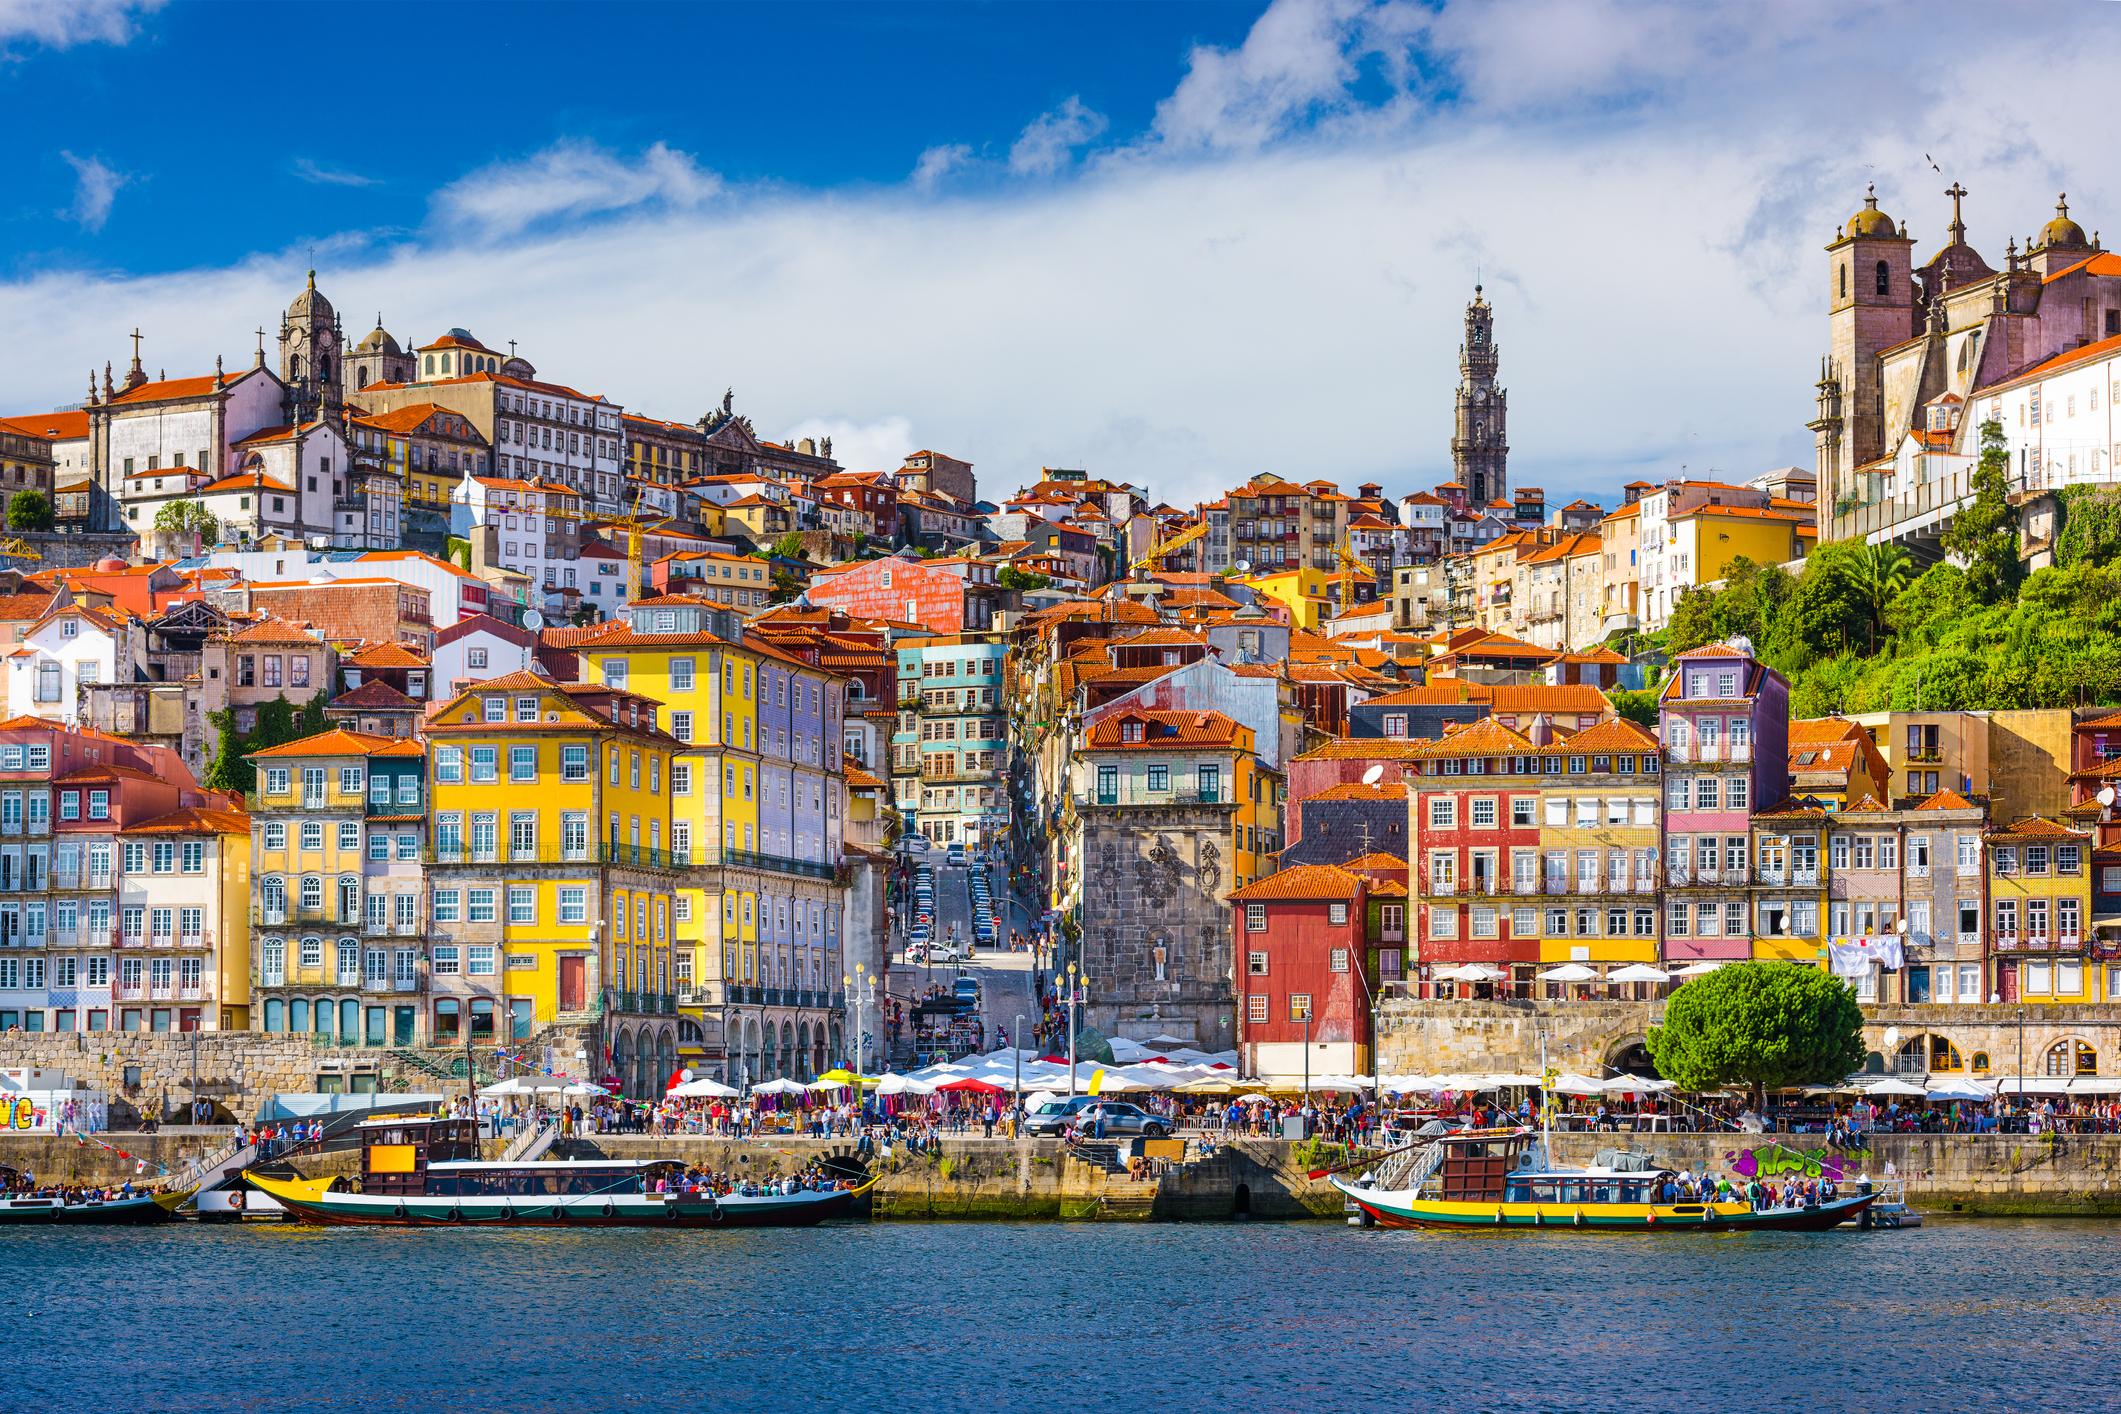 The skyline of Porto from across the Douro River